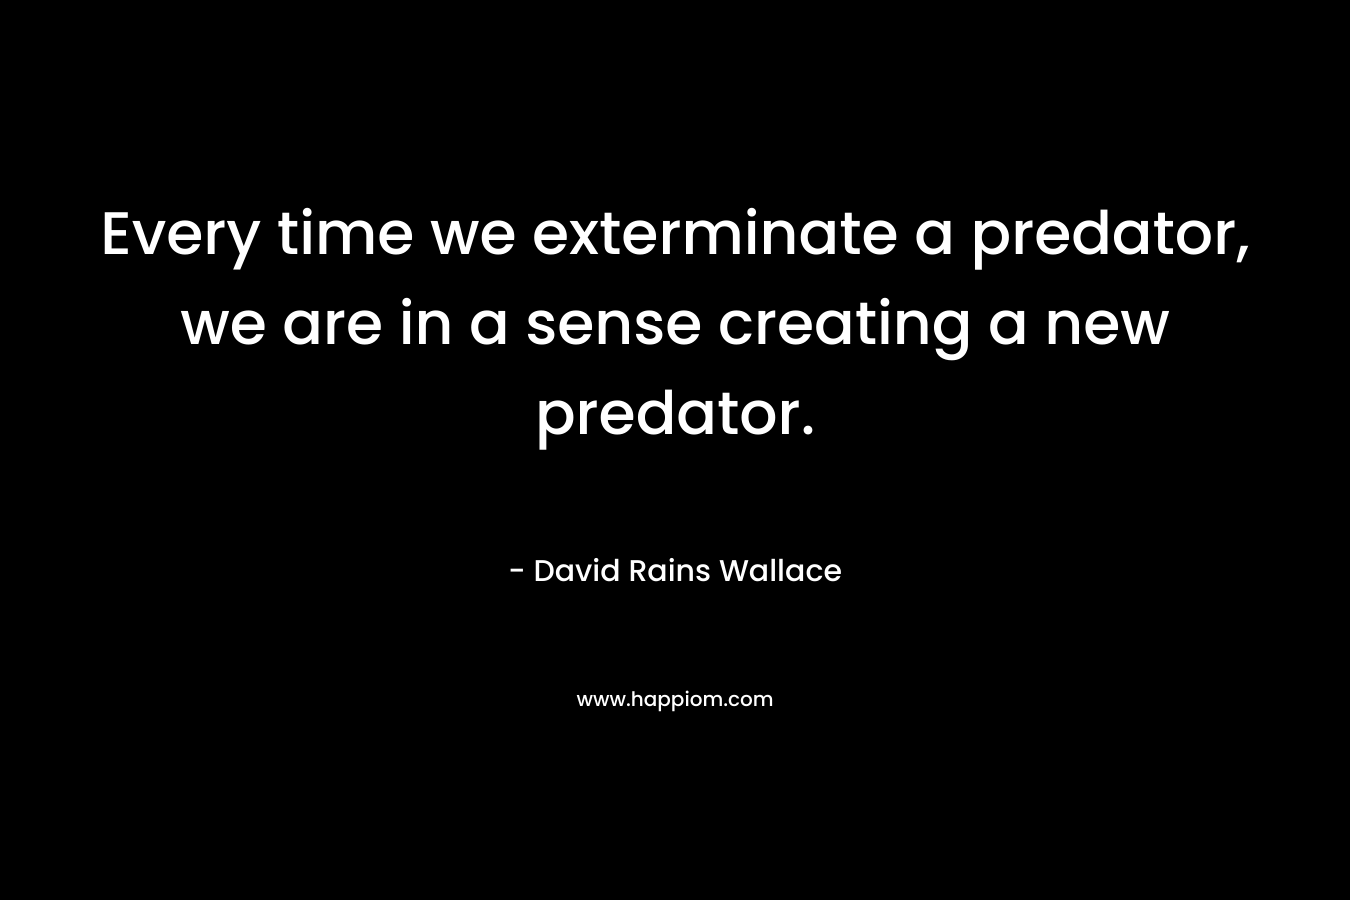 Every time we exterminate a predator, we are in a sense creating a new predator. – David Rains Wallace